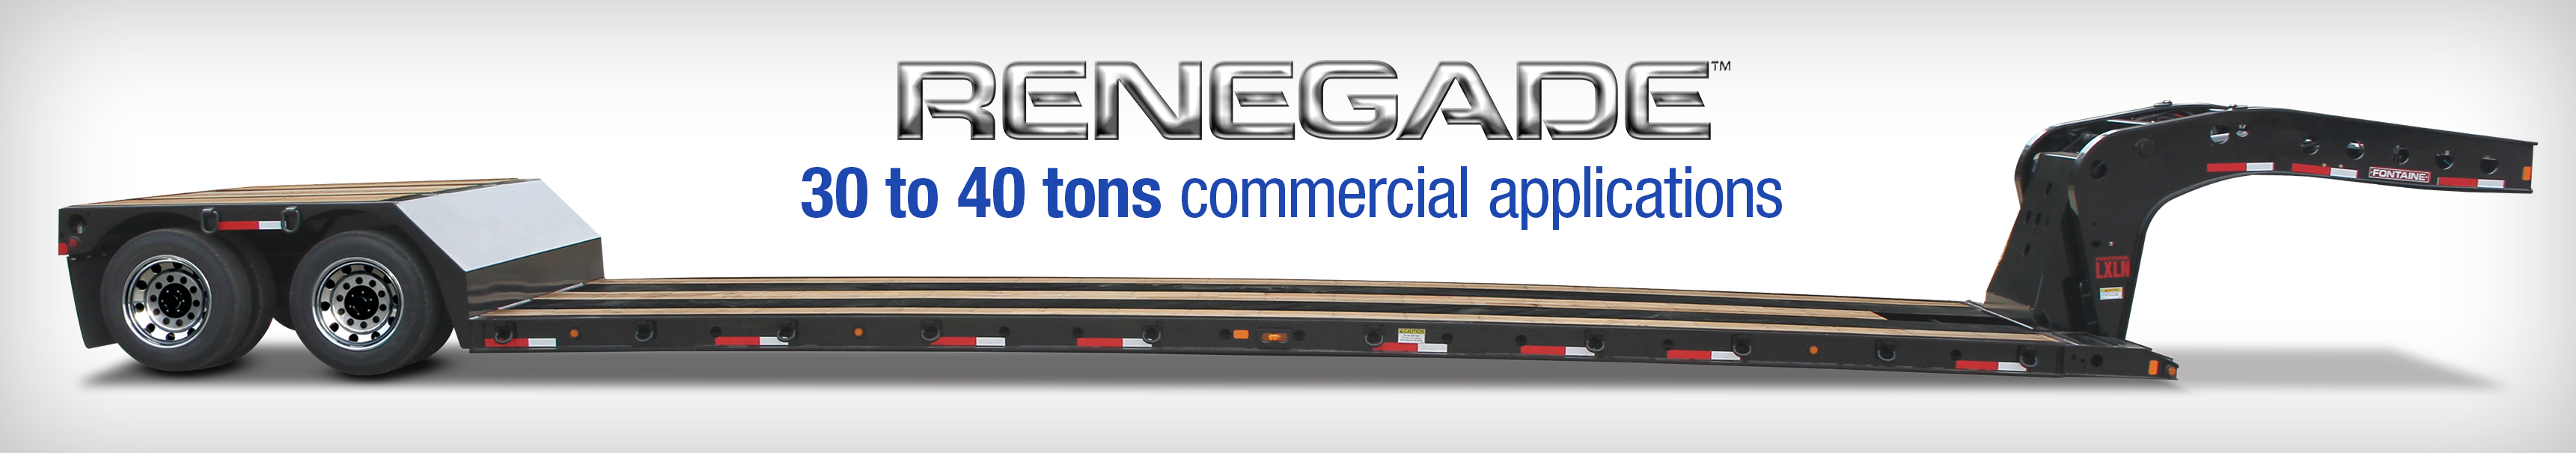 Fontaine Heavy-Haul Renegade Trailers for the commercial trailer industry